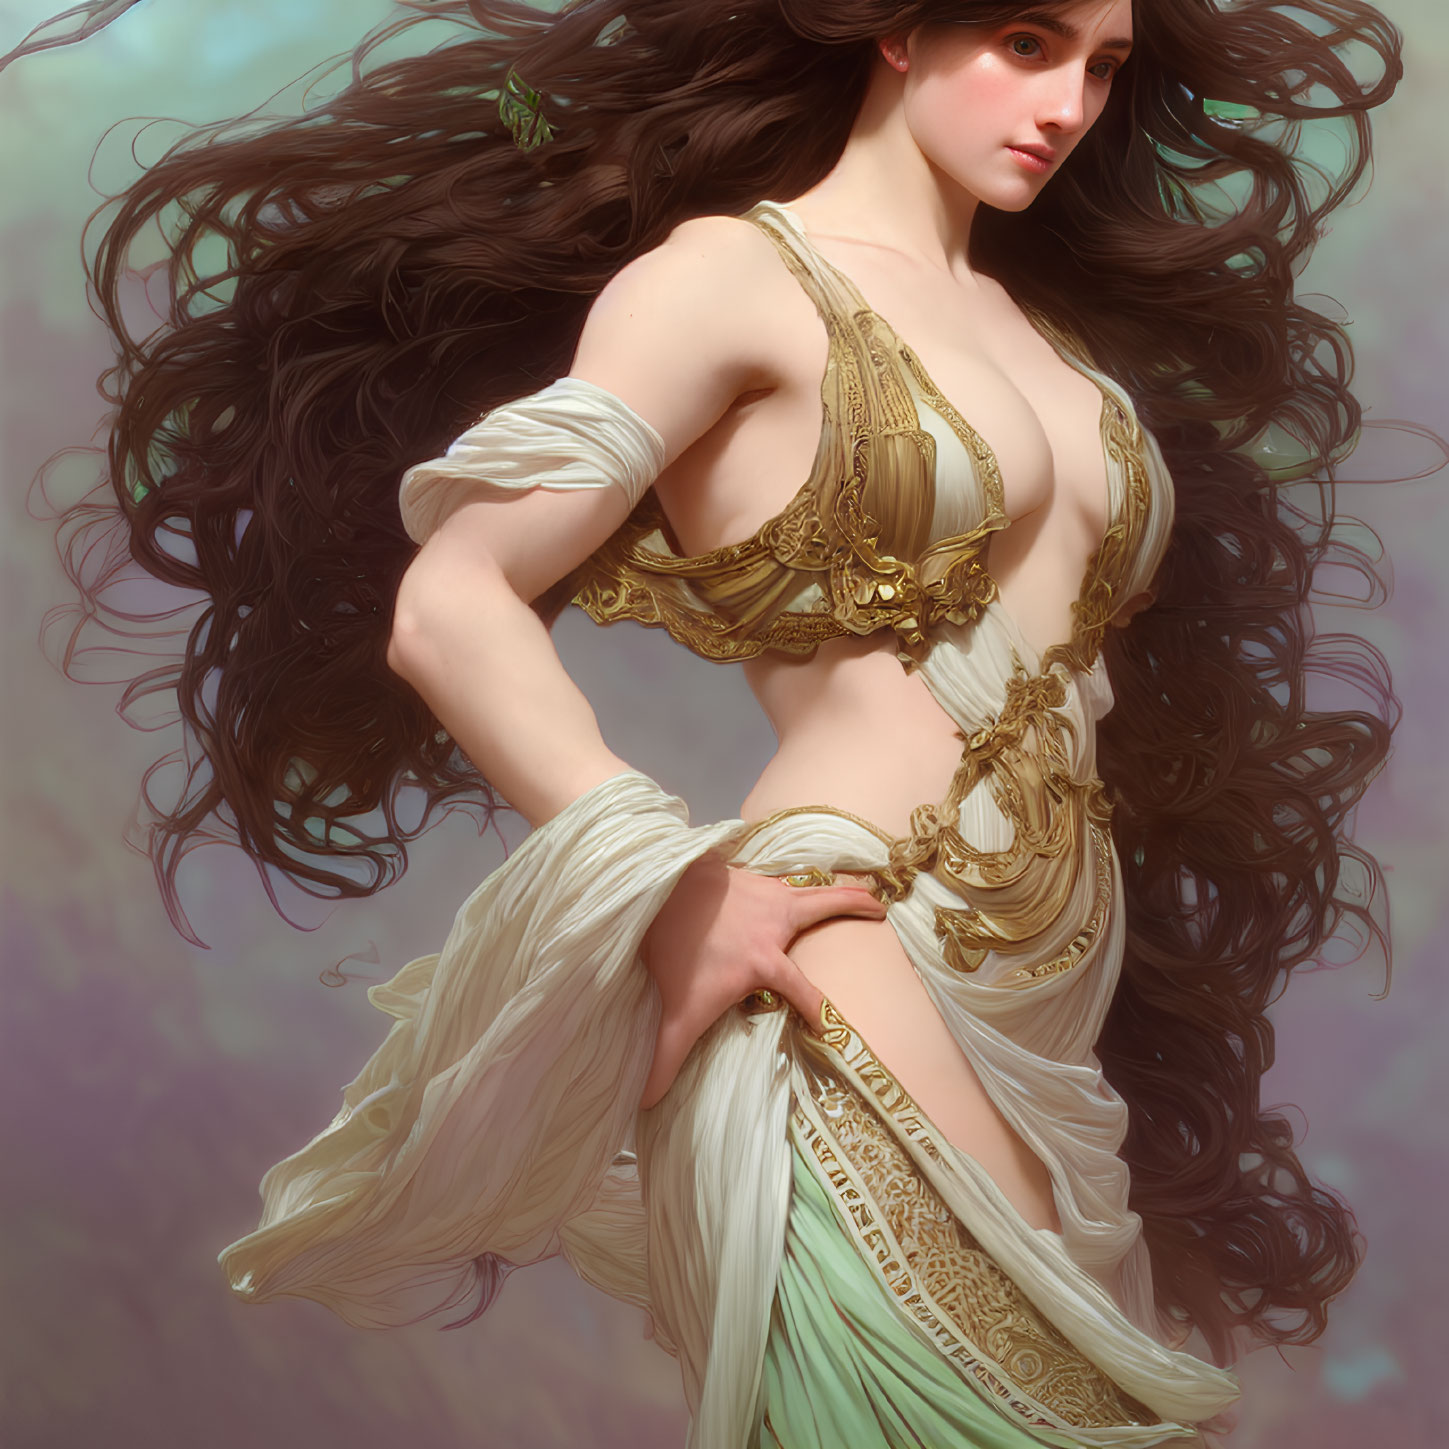 Digital Artwork: Woman with Dark Hair in Fantasy White & Gold Outfit